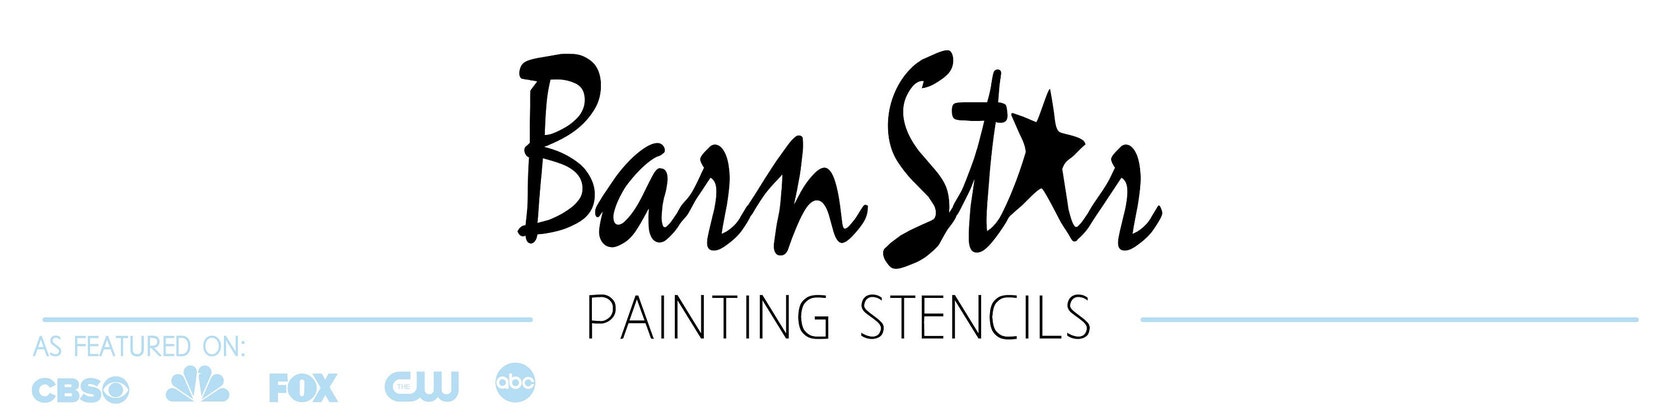 Letter Stencils Kit 5 Inch Stencil Paint Your Own Sign 